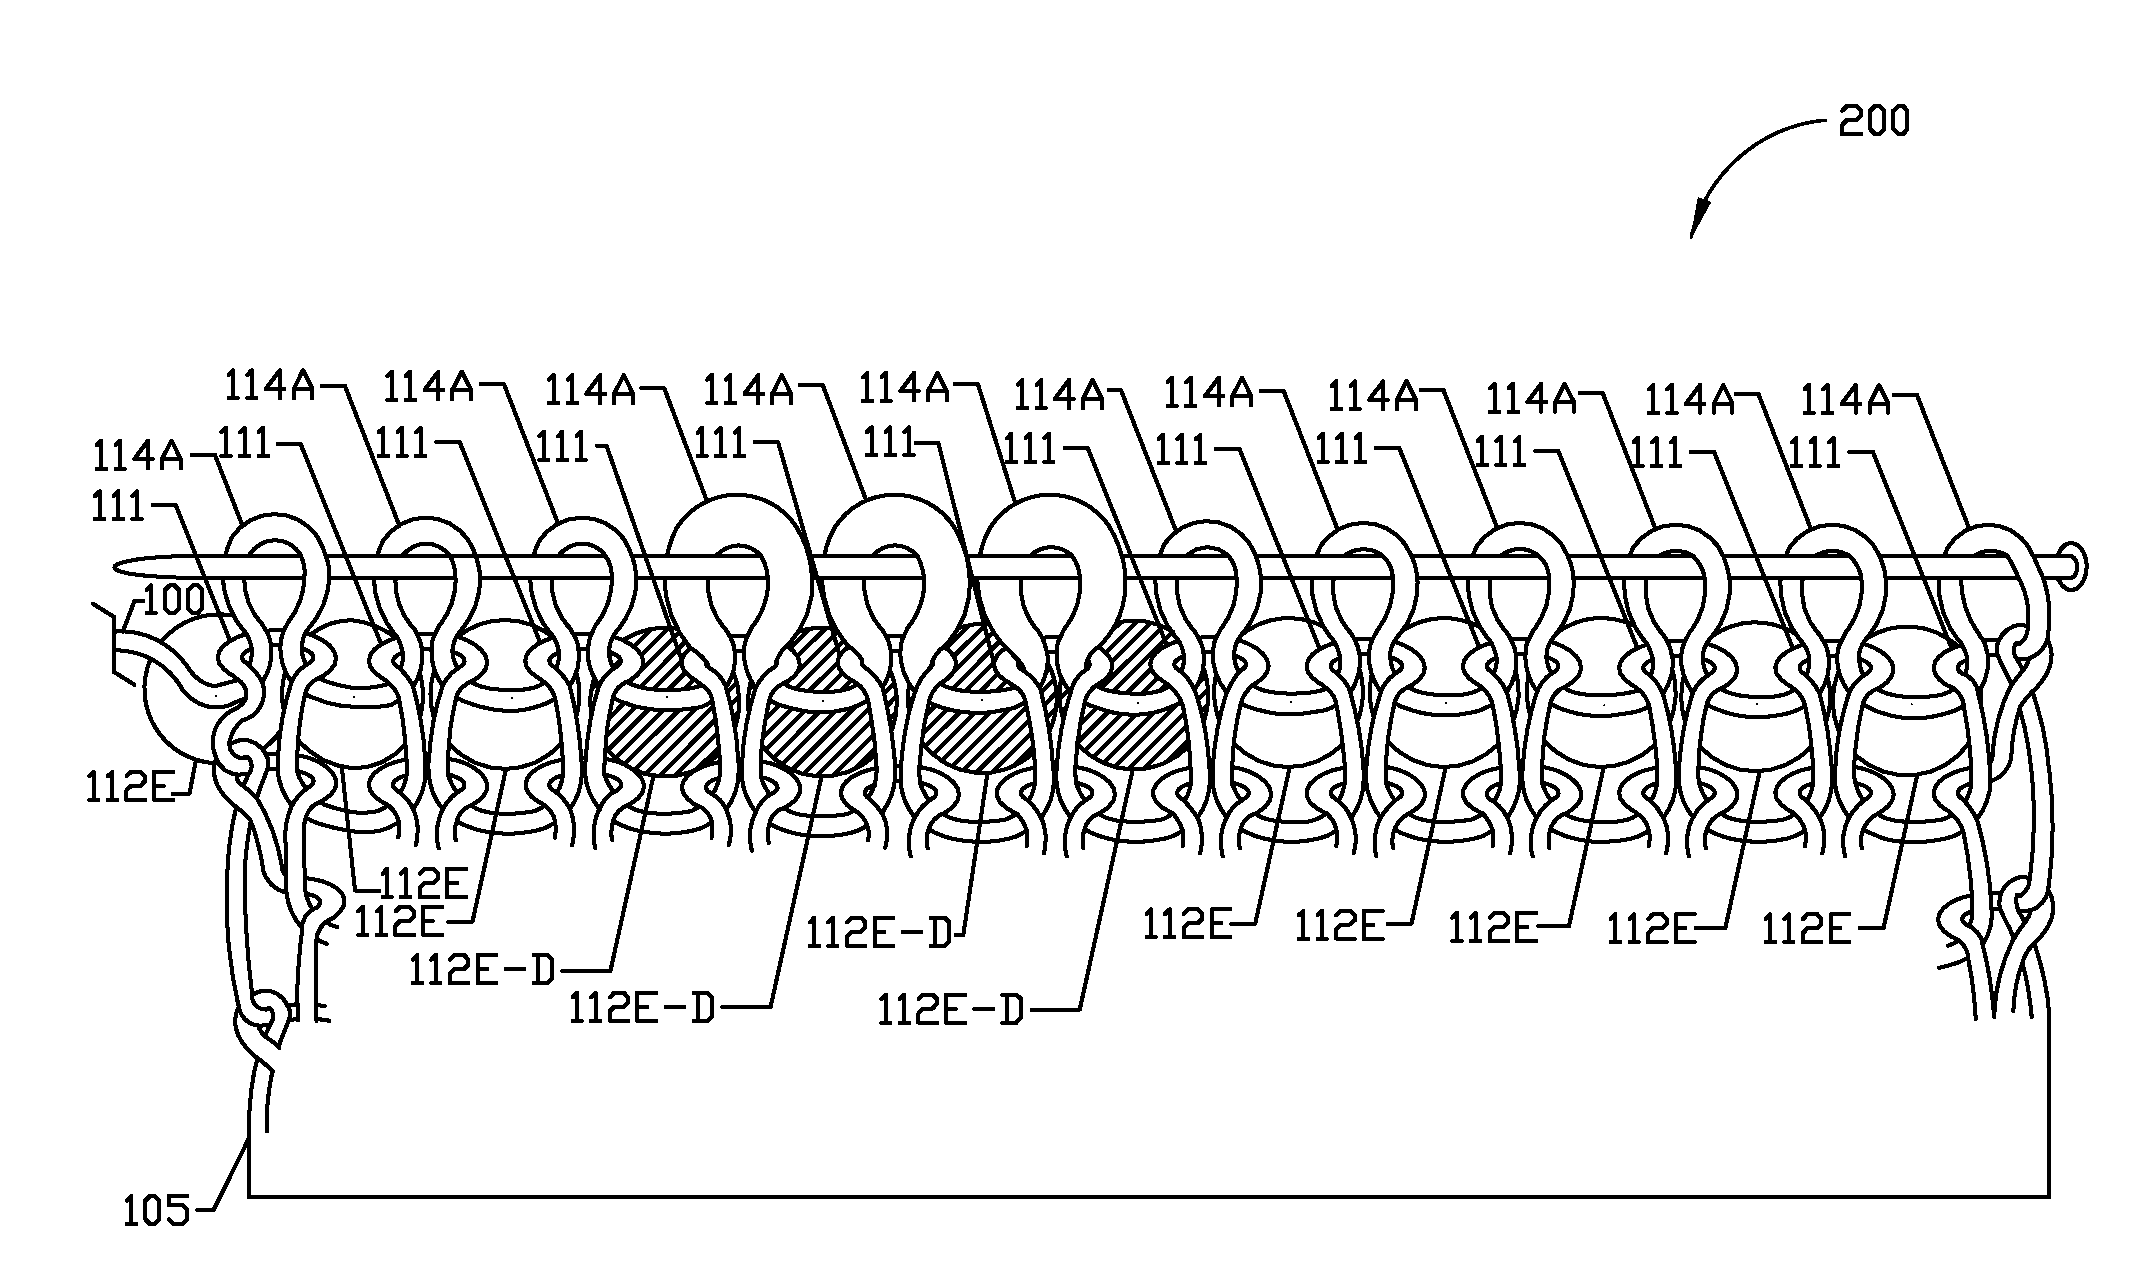 System and method for forming a design from a flexible filament having indicators